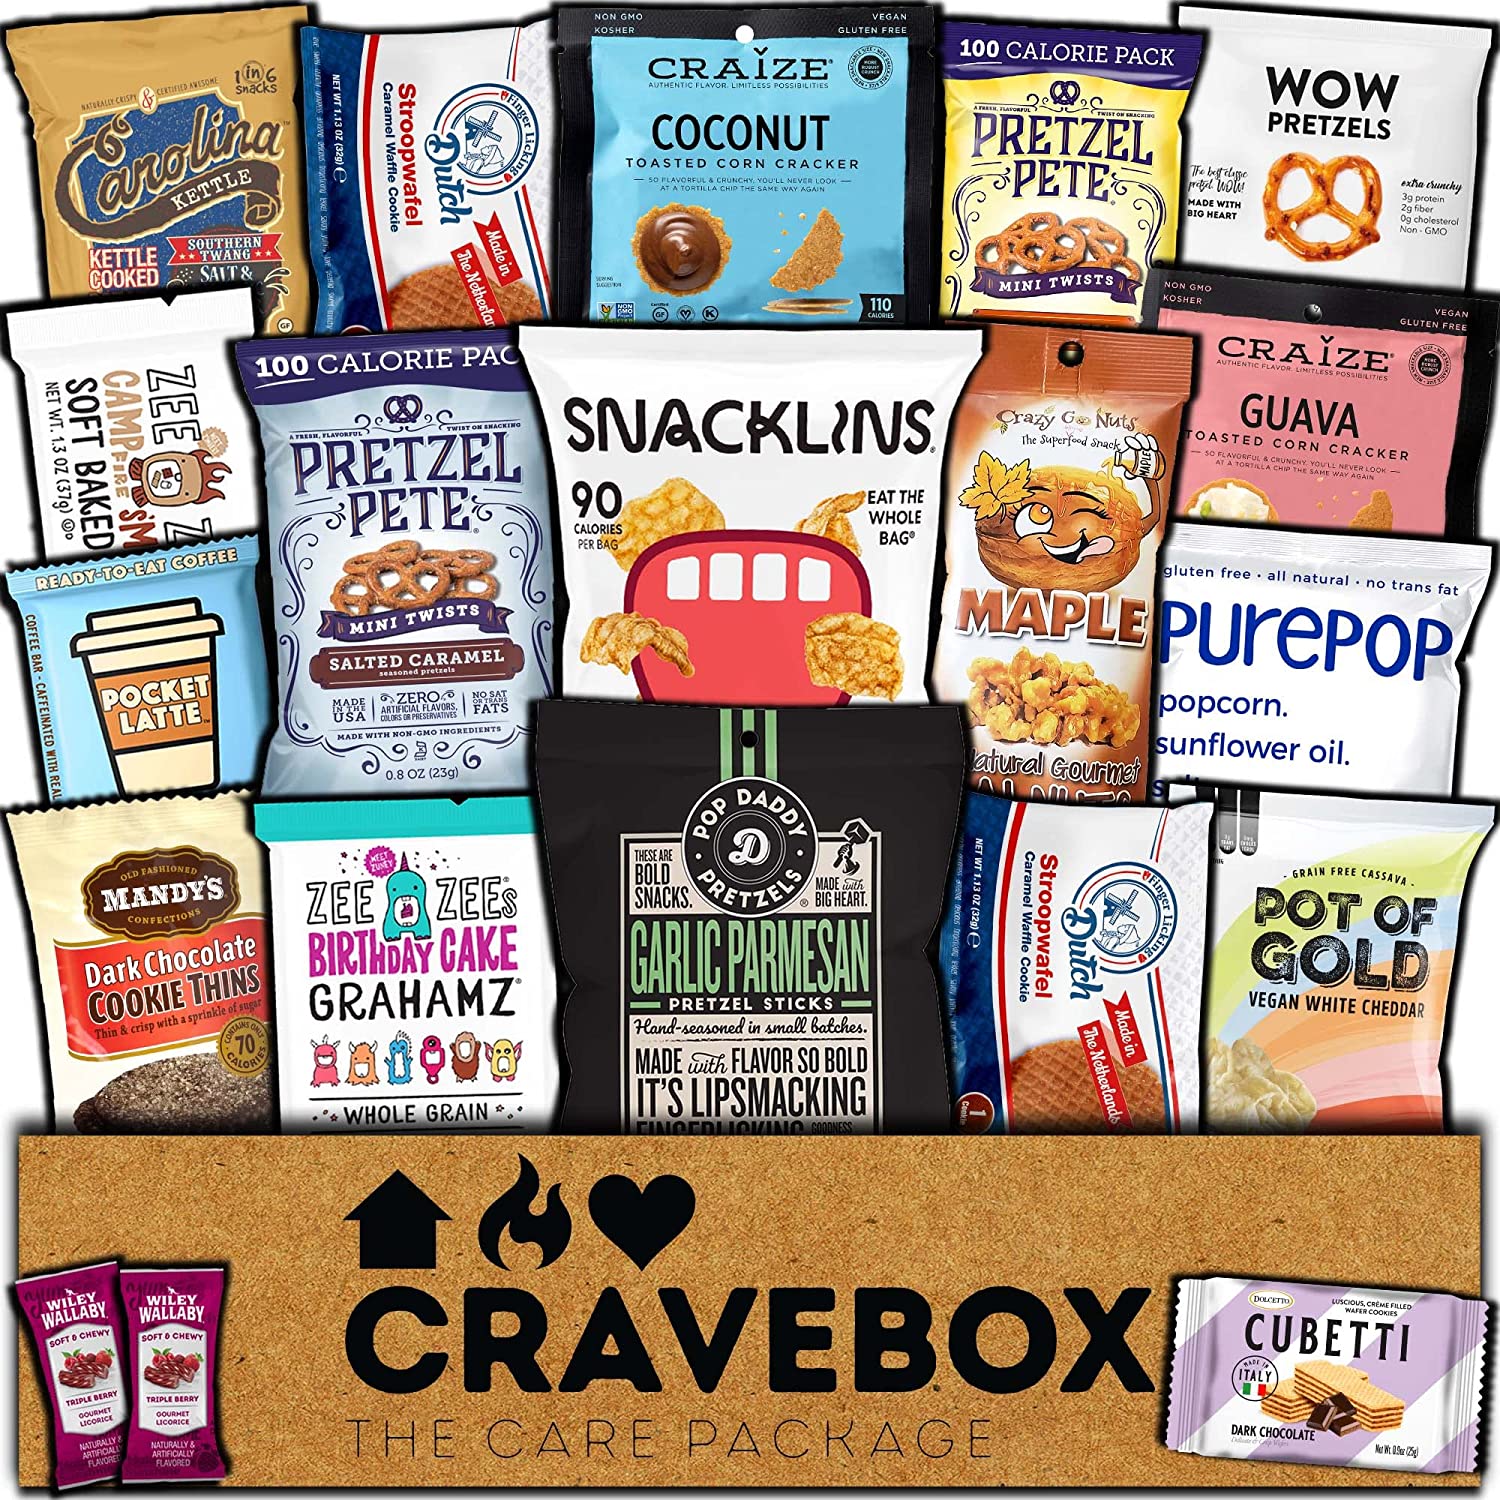 CRAVEBOX Valentines Day Gourmet Specialty Snacks Box Care Package (20ct) Boxes for College Students Adults Healthy Cookies Bar Organic Variety Gift Pack Assortment Basket Mix Sampler Treat Final Exam Office Men Women